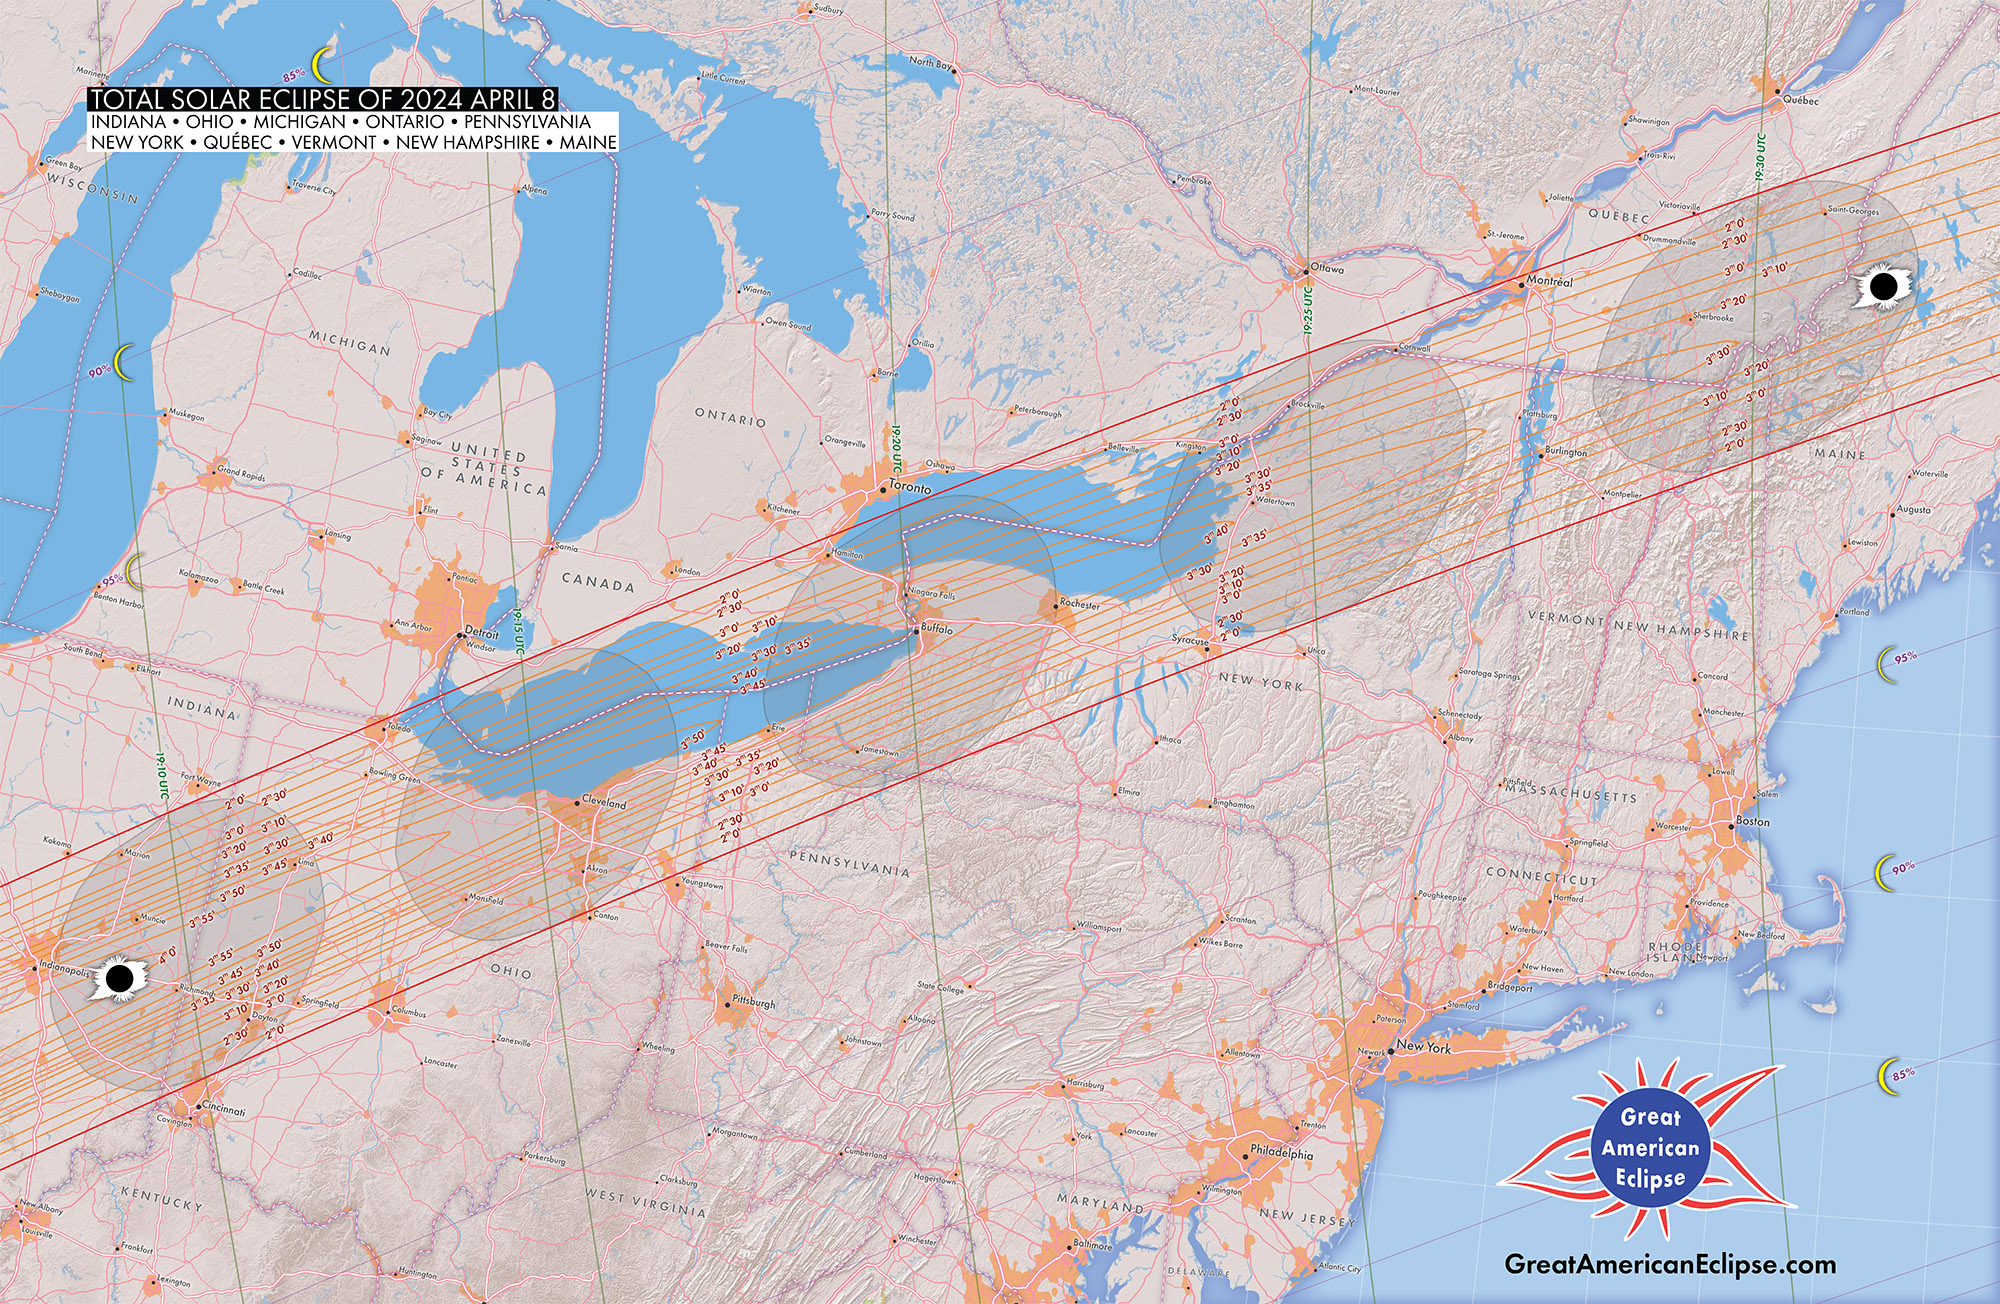 CREDIT: GreatAmericanEclipse.com - Detailed path of the April 8, 2024 total solar eclipse over the eastern states of the US